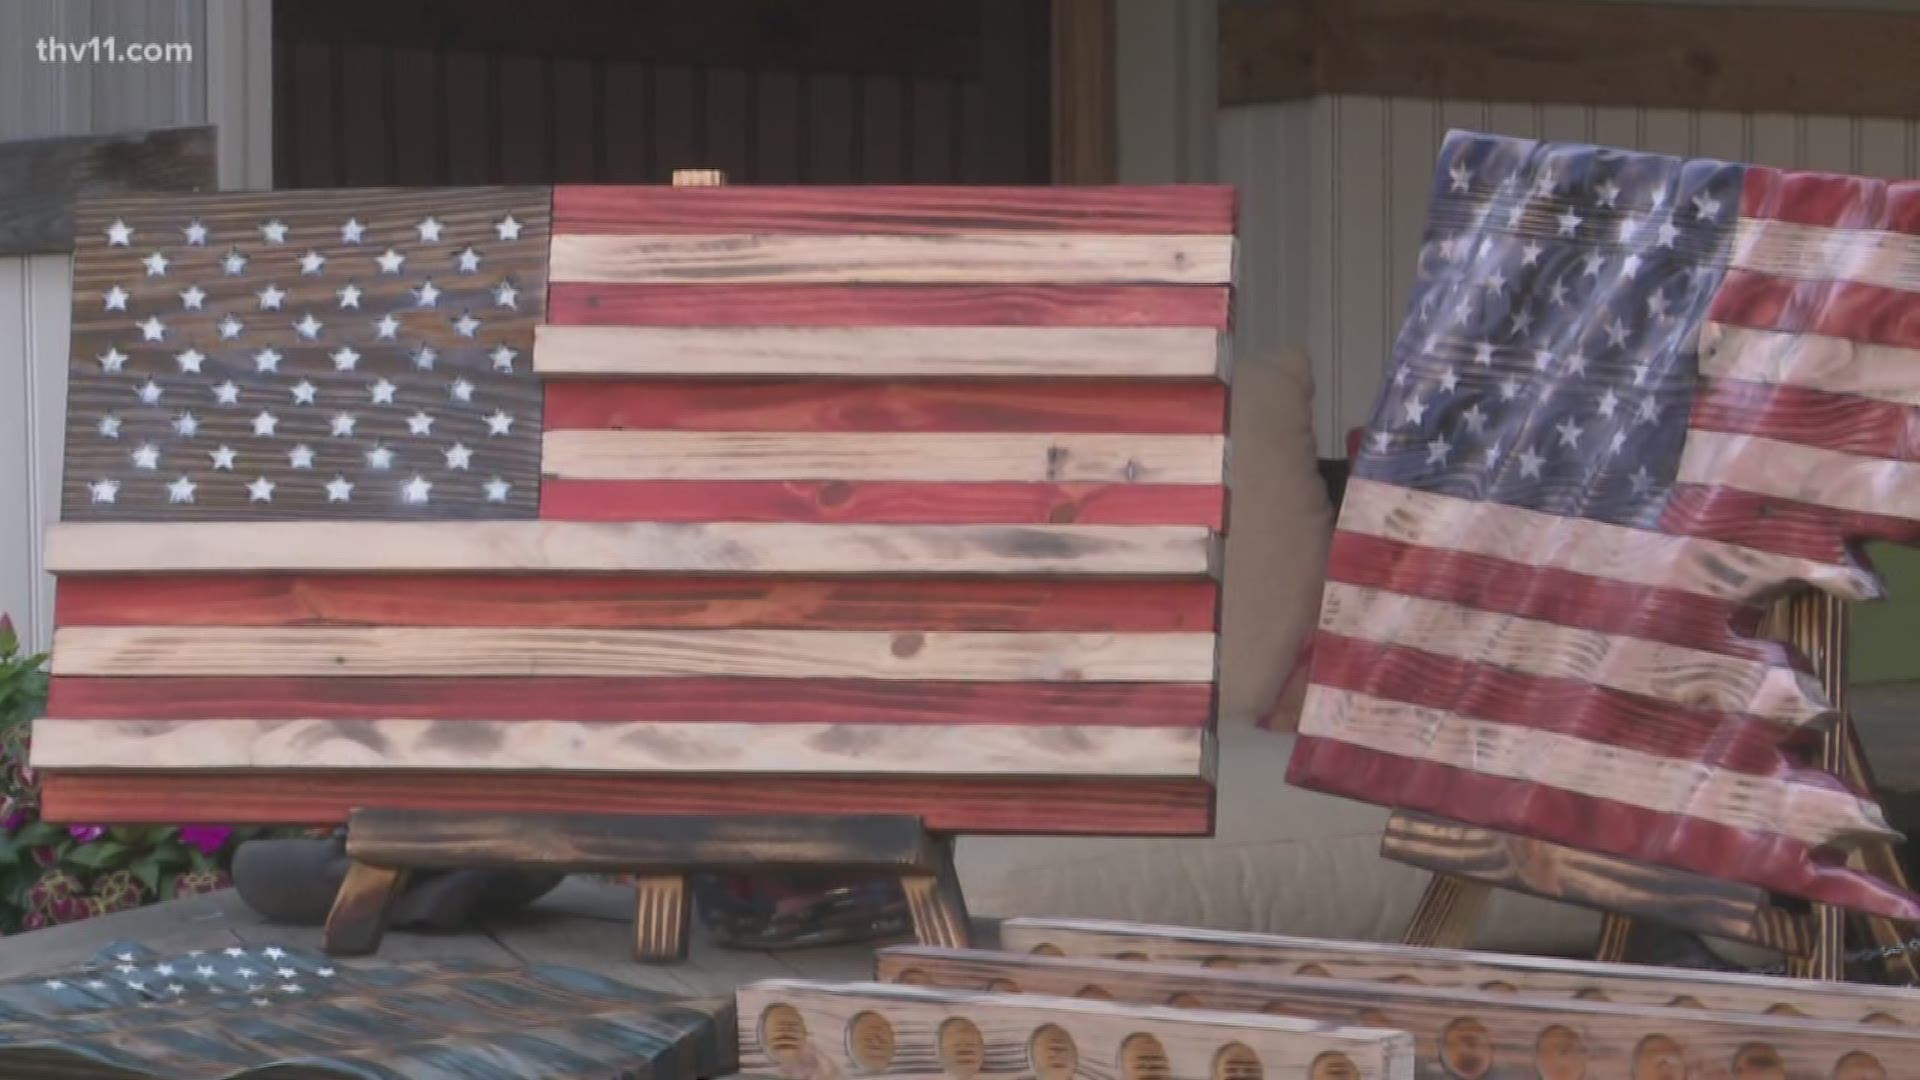 Rozman Wood Design creates beautiful flag-themed masterpieces and decorative items out of wood. This shop is Veteran owned and operated, located in Cabot, AR.